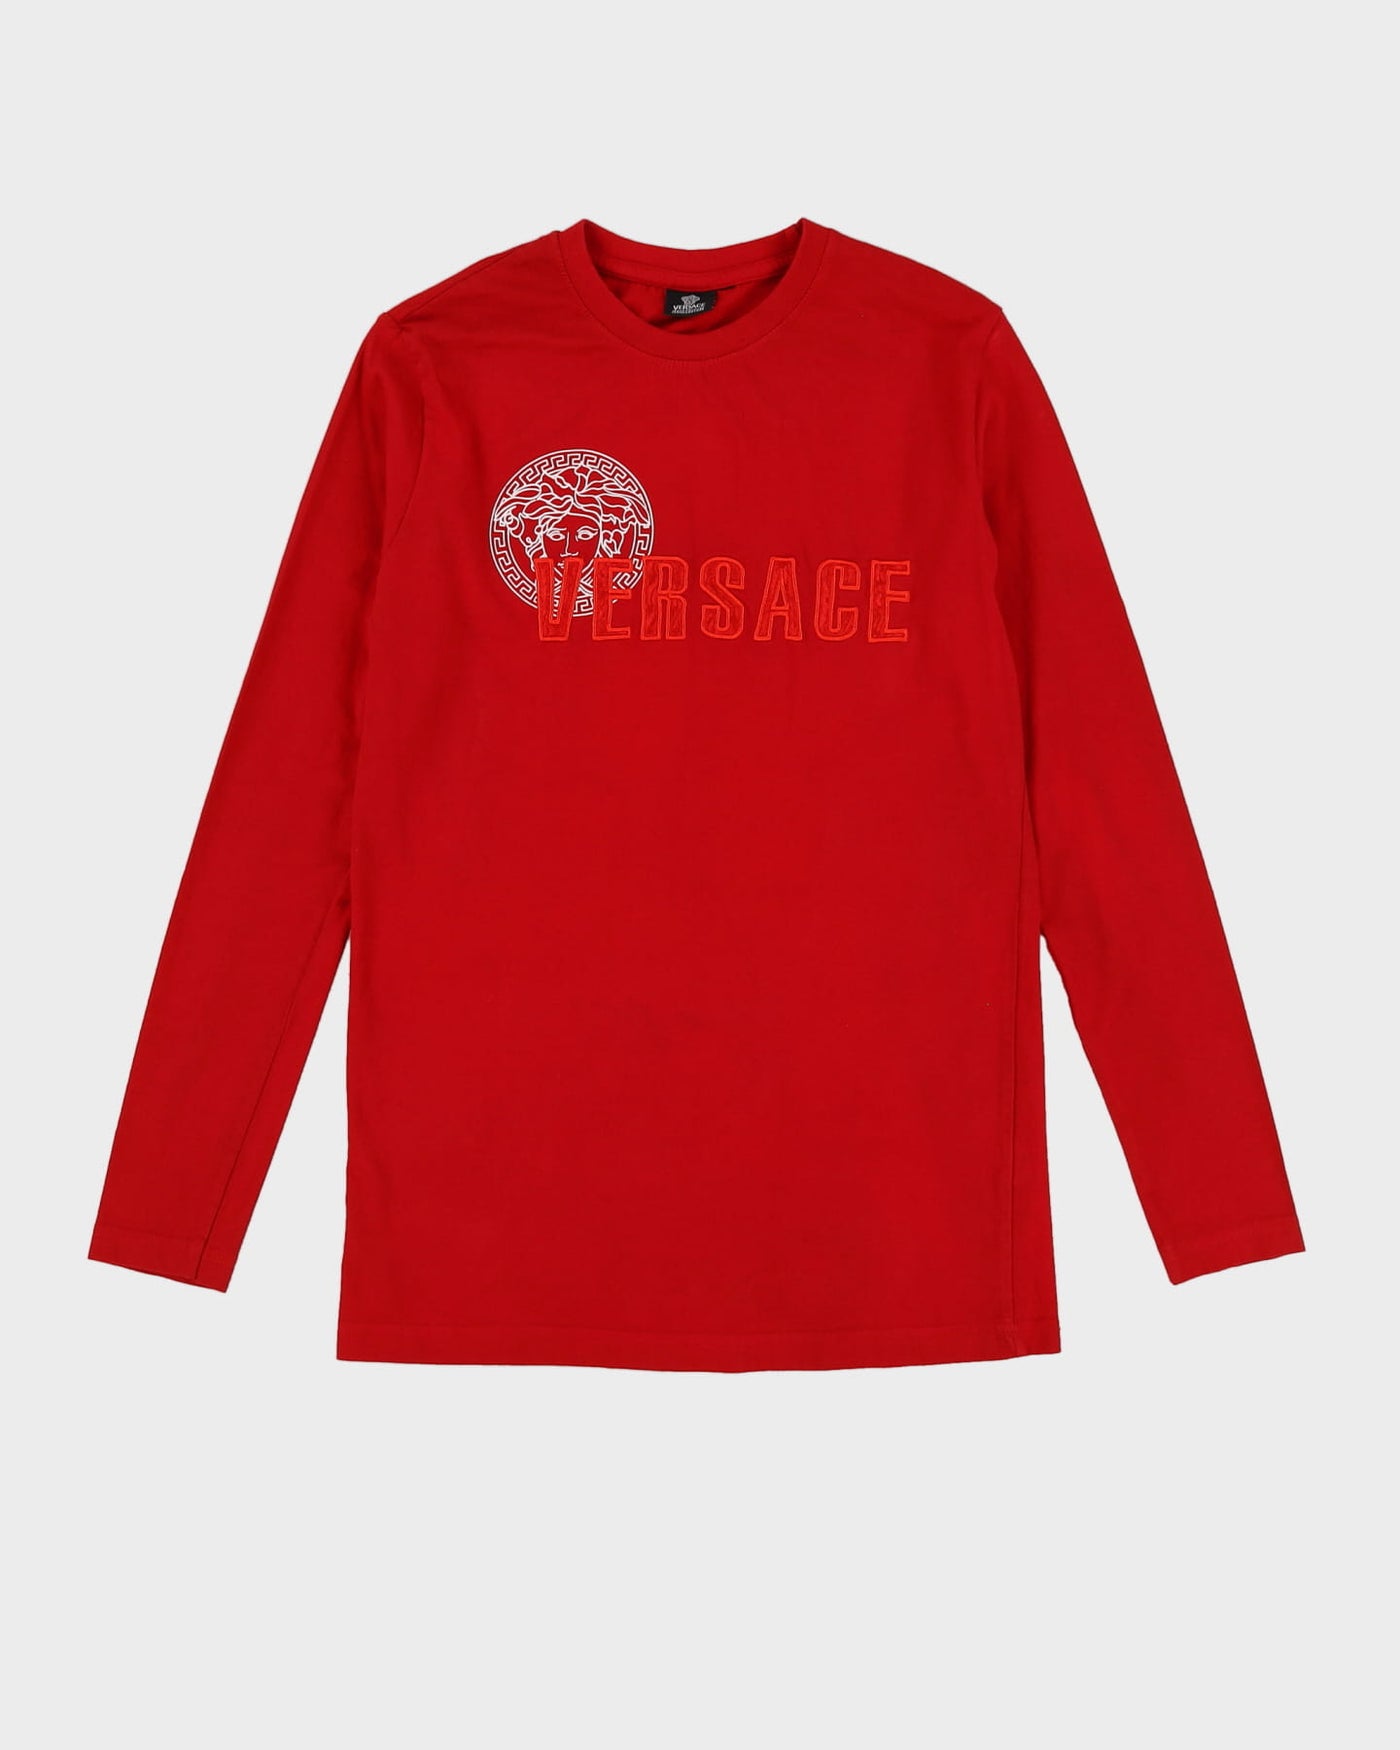 00s Versace Jeans Long Sleeve Red Embroidered T-Shirt - XS